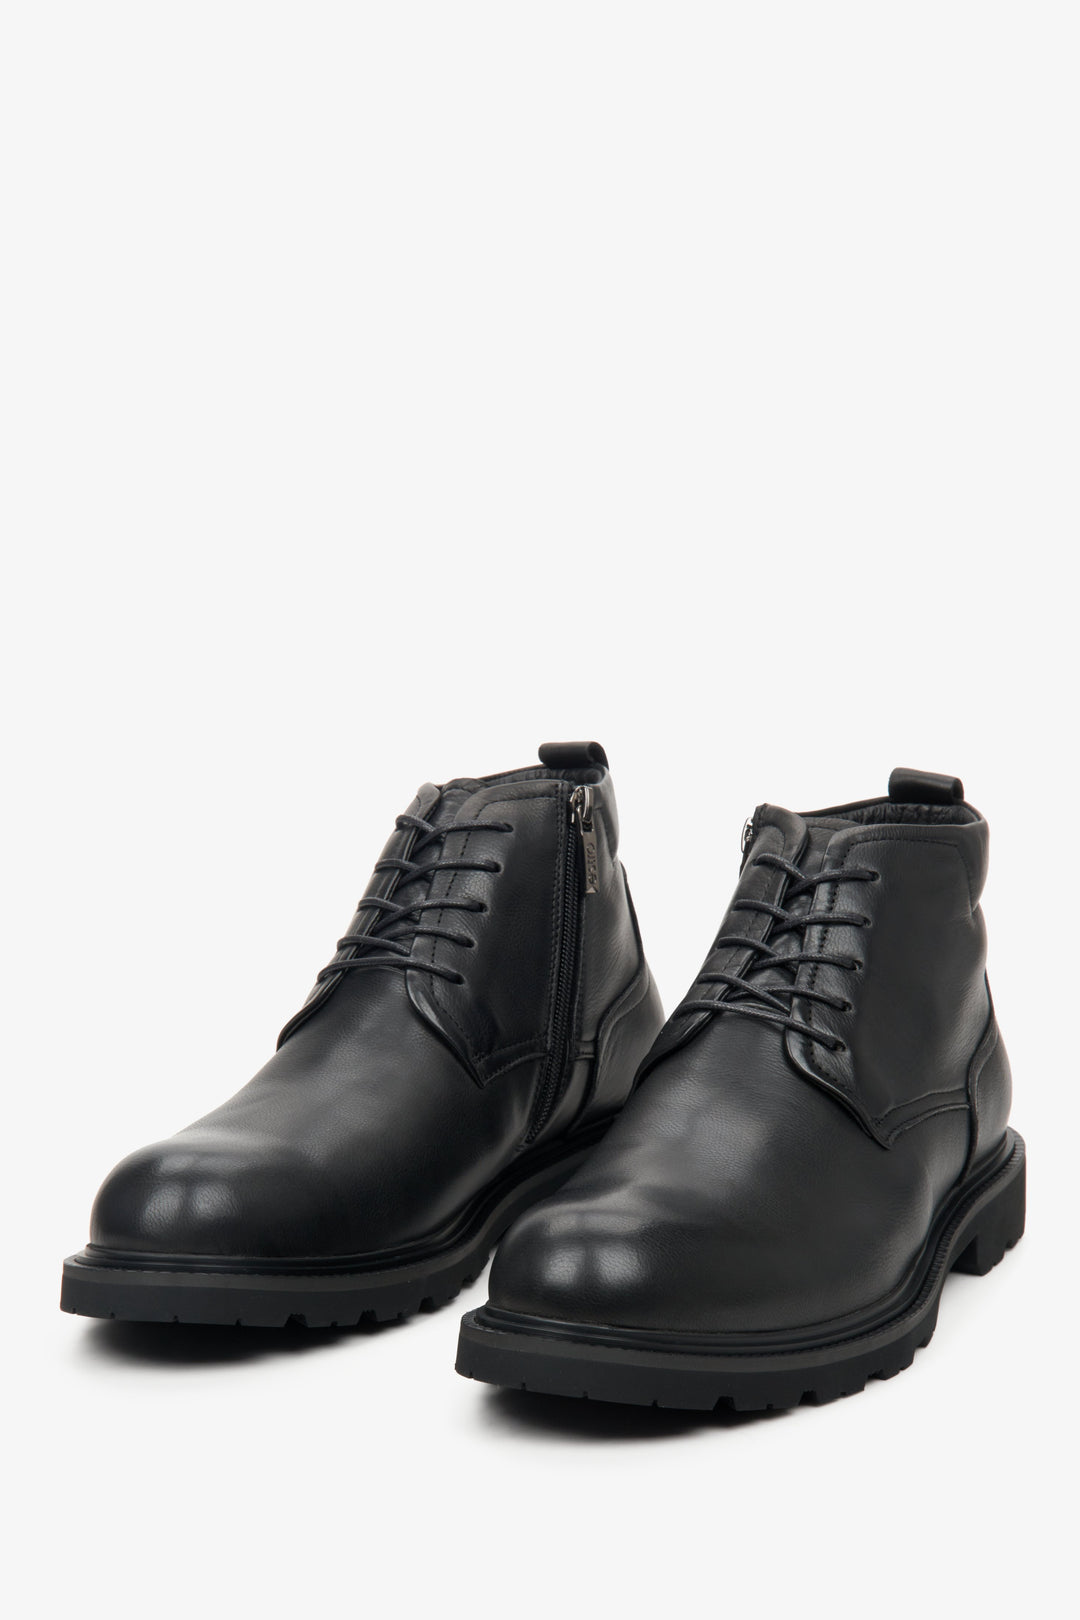 Black men's leather winter boots by Estro - close-up on the toe.